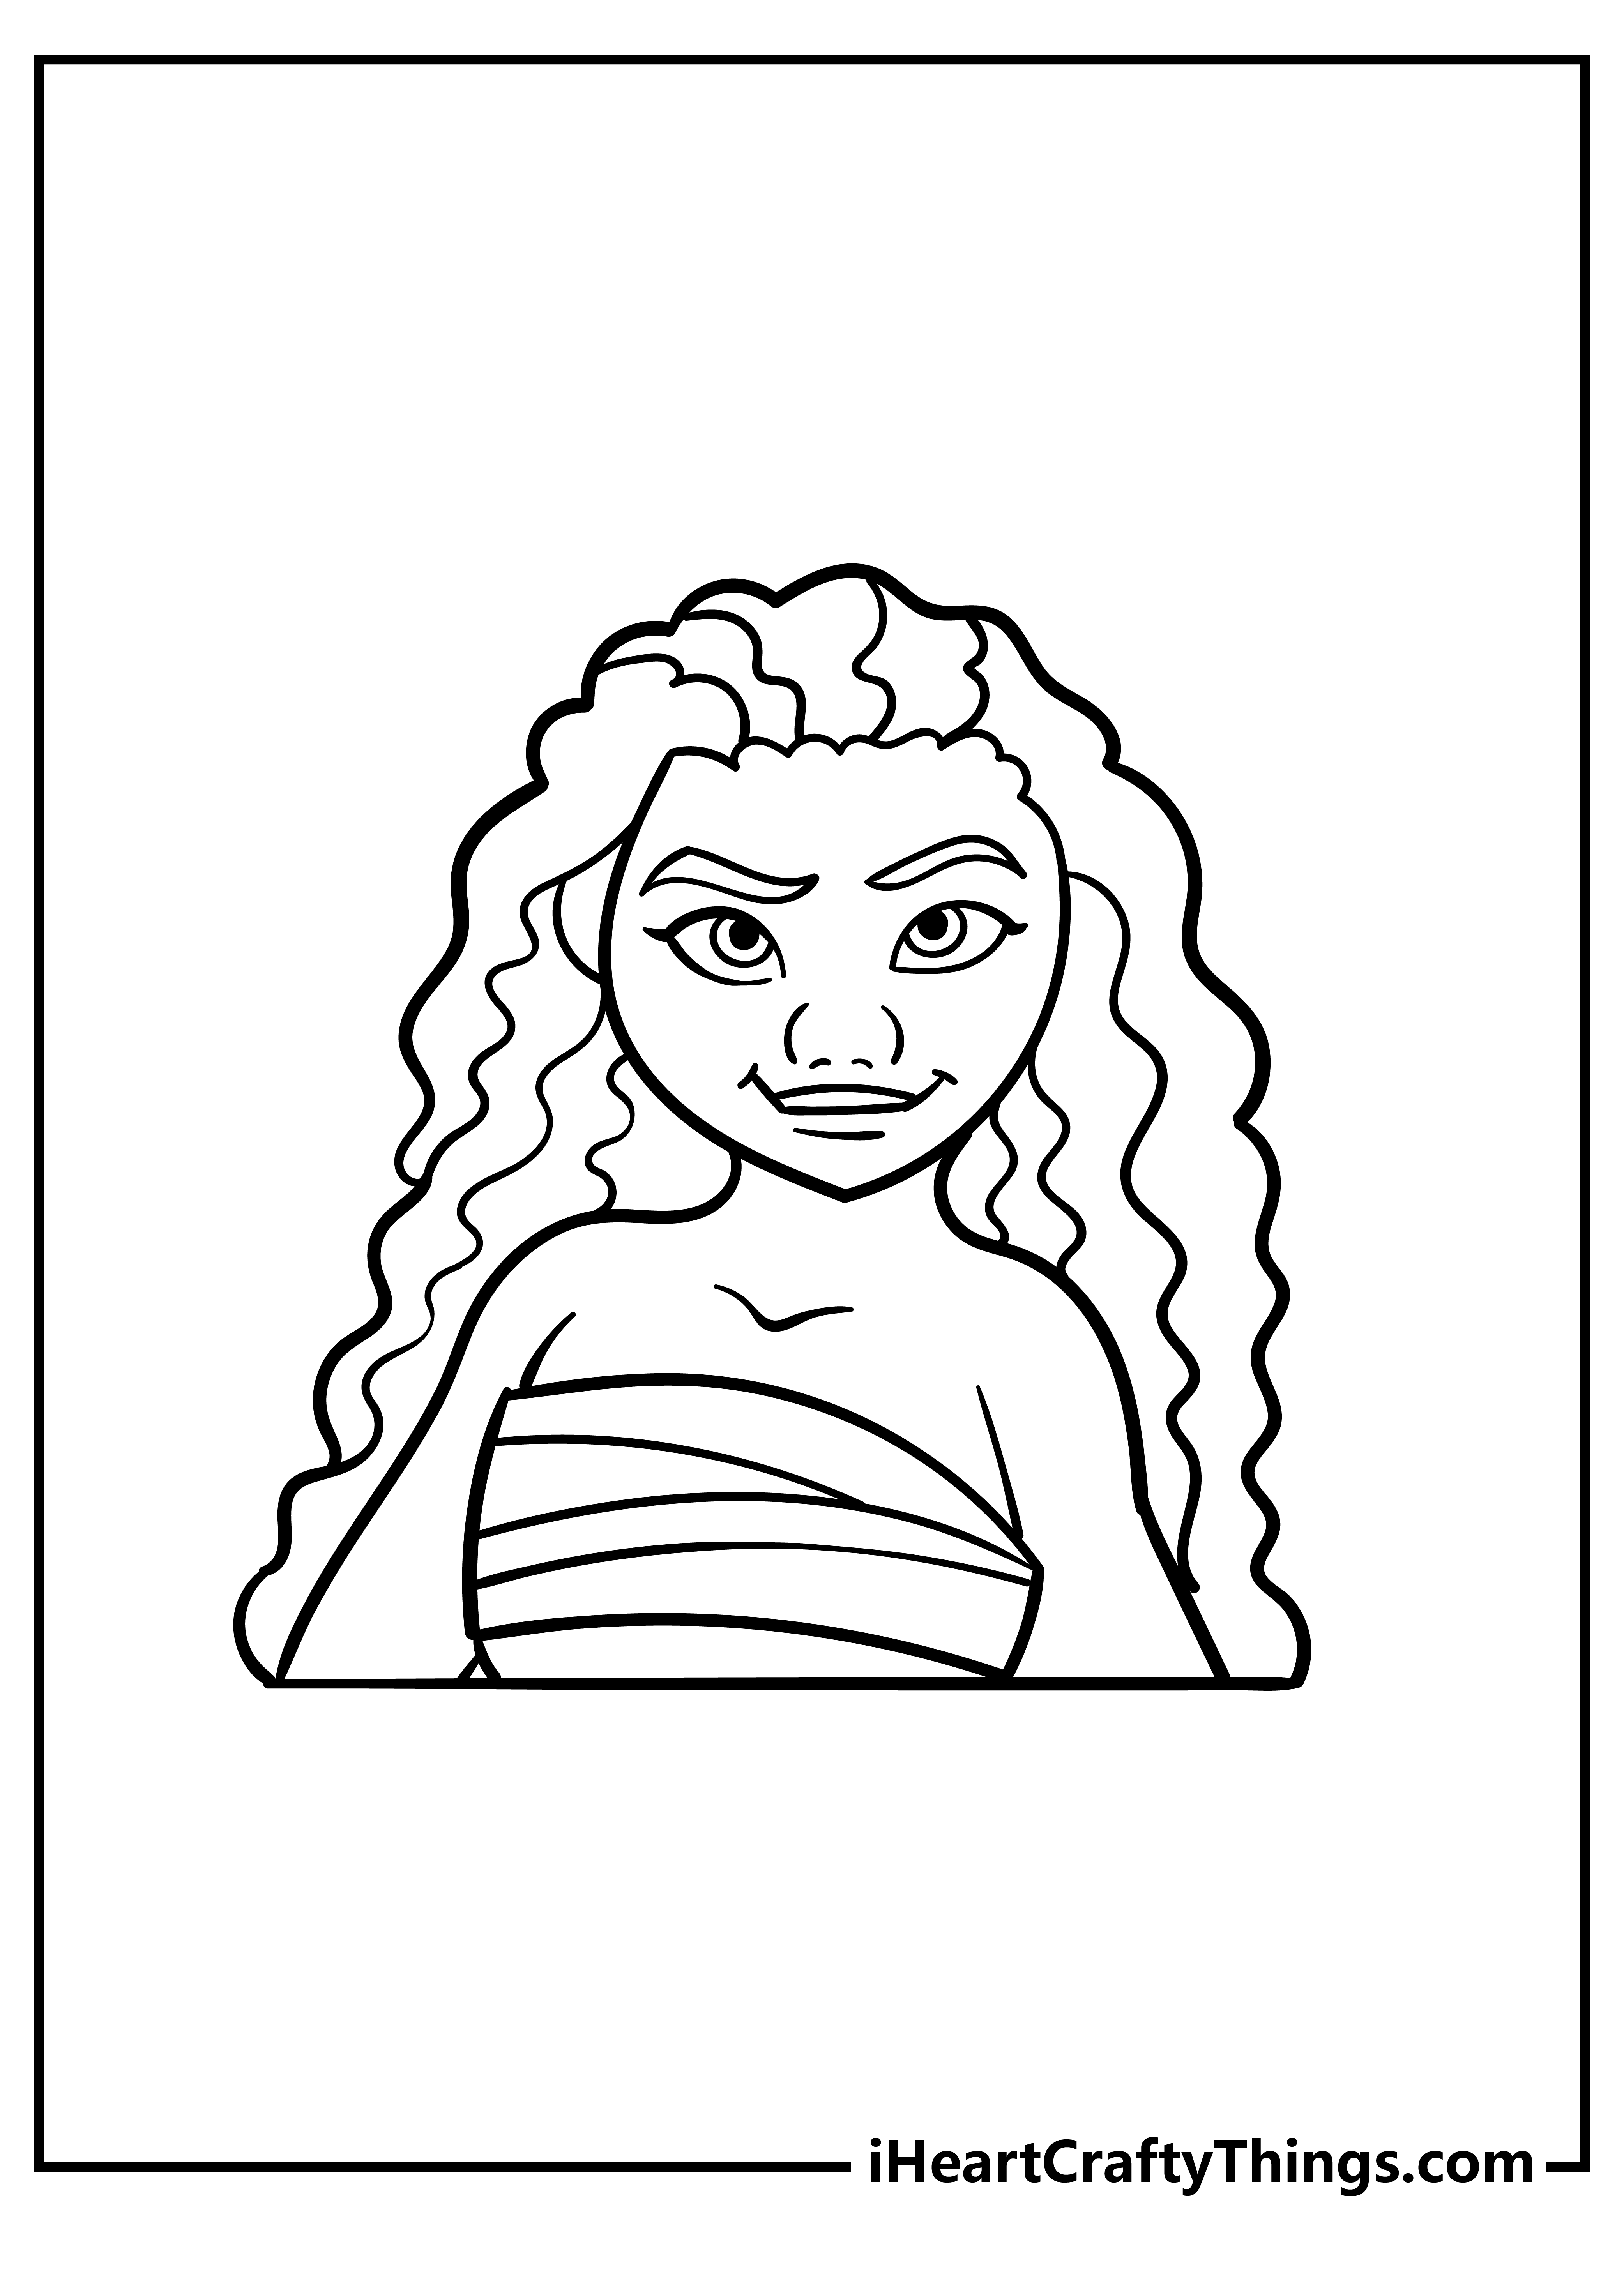 Moana Coloring Sheet for children free download